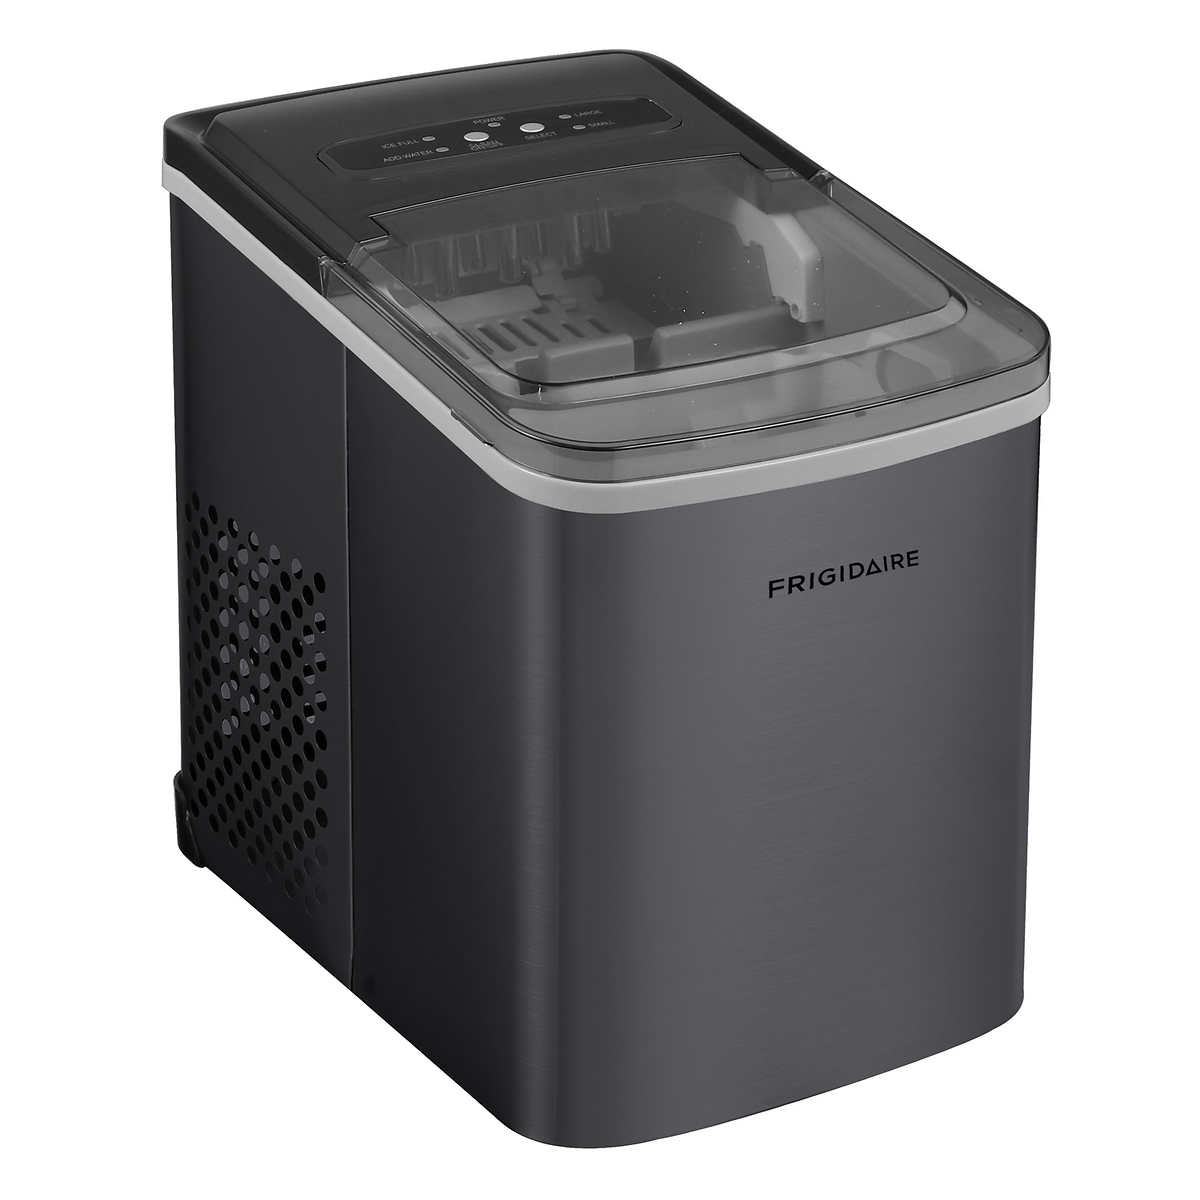 Frigidaire Self-Cleaning Stainless Steel Ice Maker